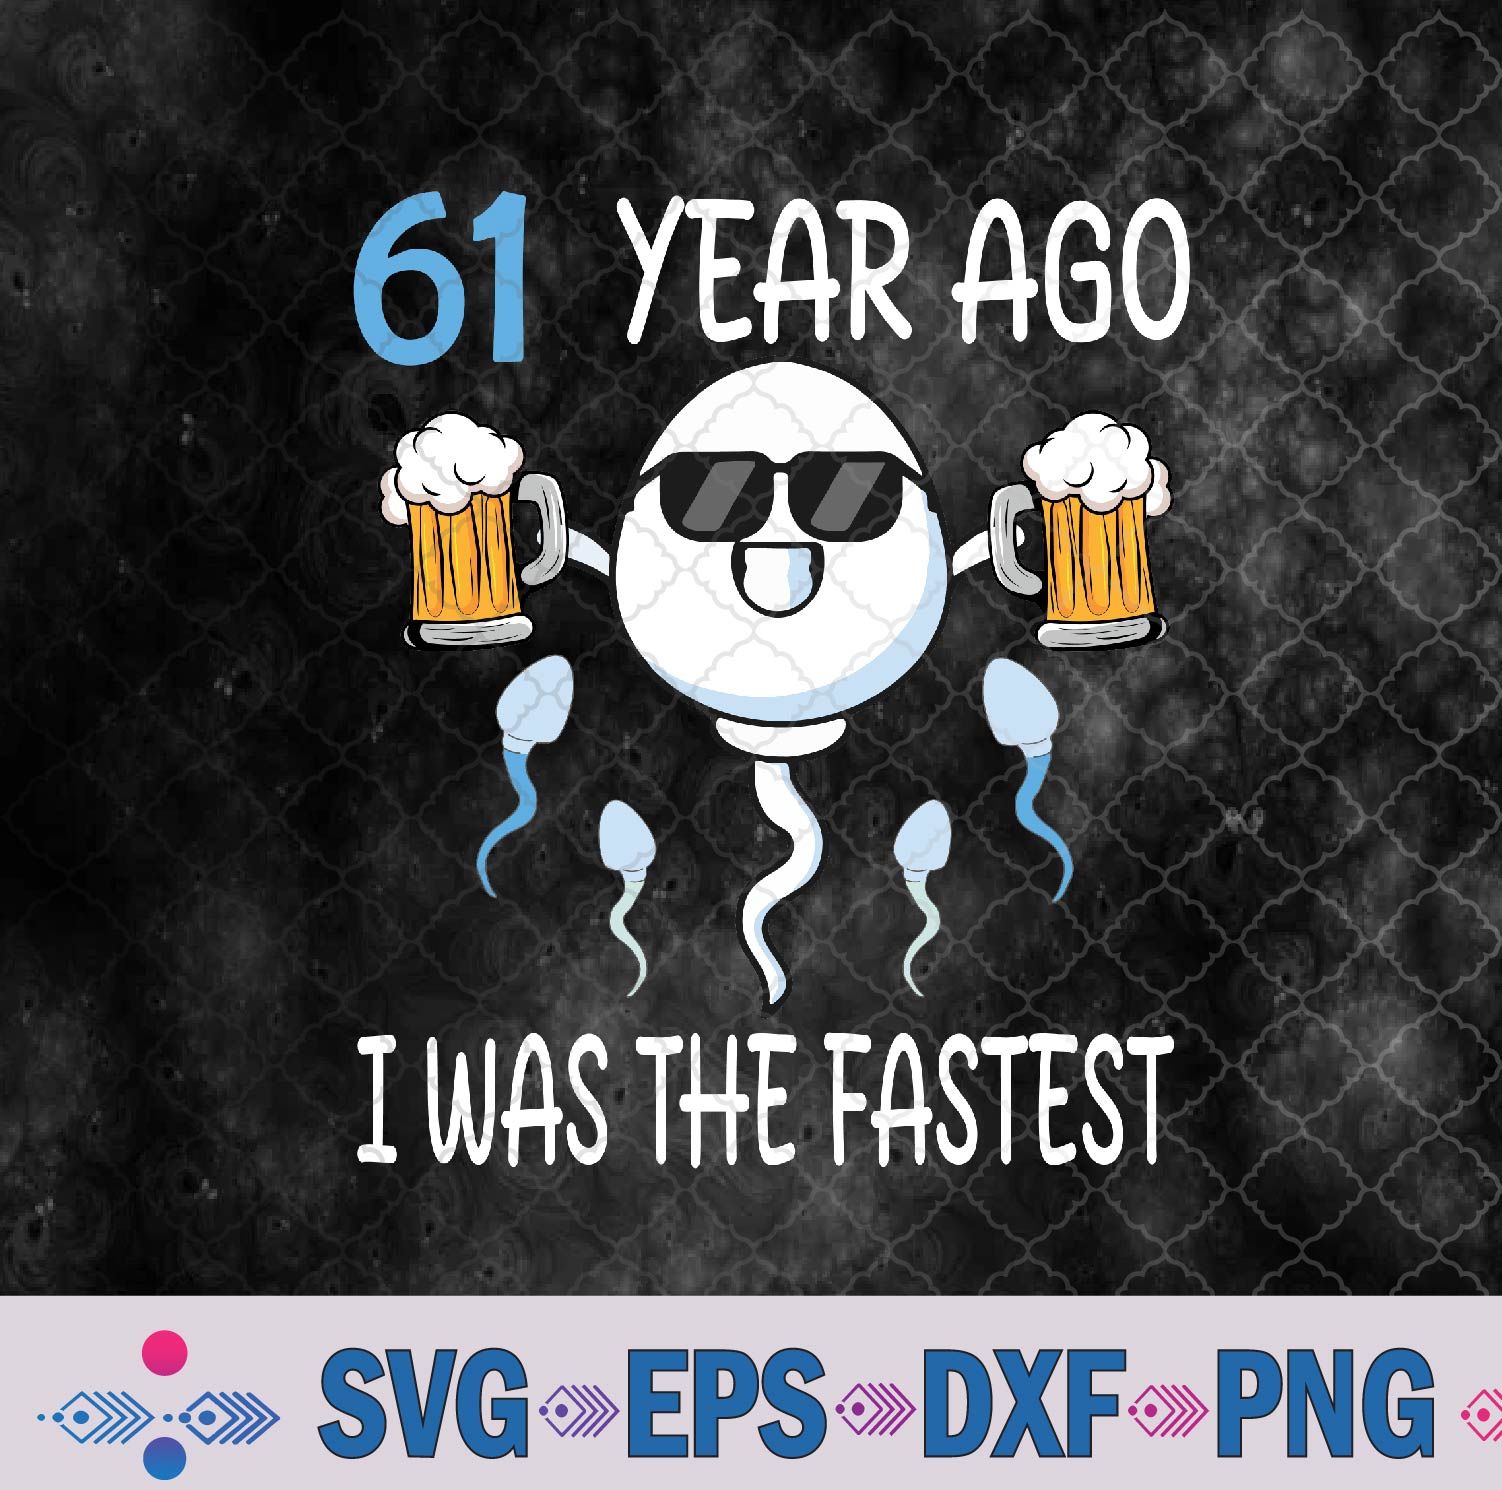 WTMNEW9file 09 9 61 Years Ago I Was The Fastest Birthday Decorations Svg, Png, Digital Download